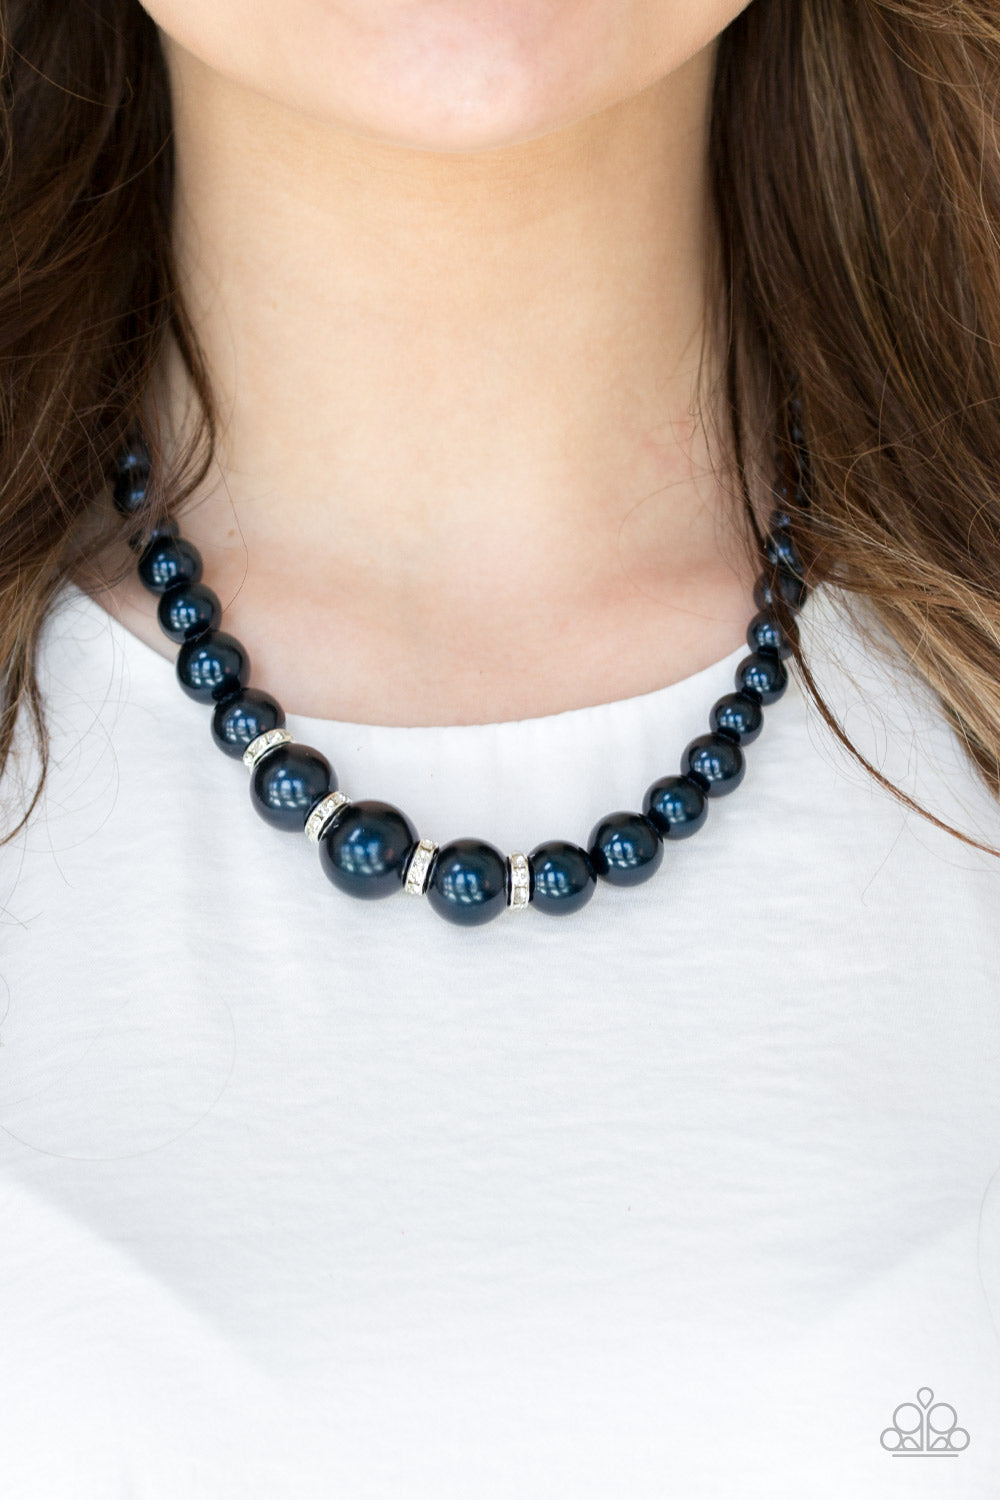 Paparazzi Accessories  - Party Pearls #N219 Box 3 - Blue Necklace